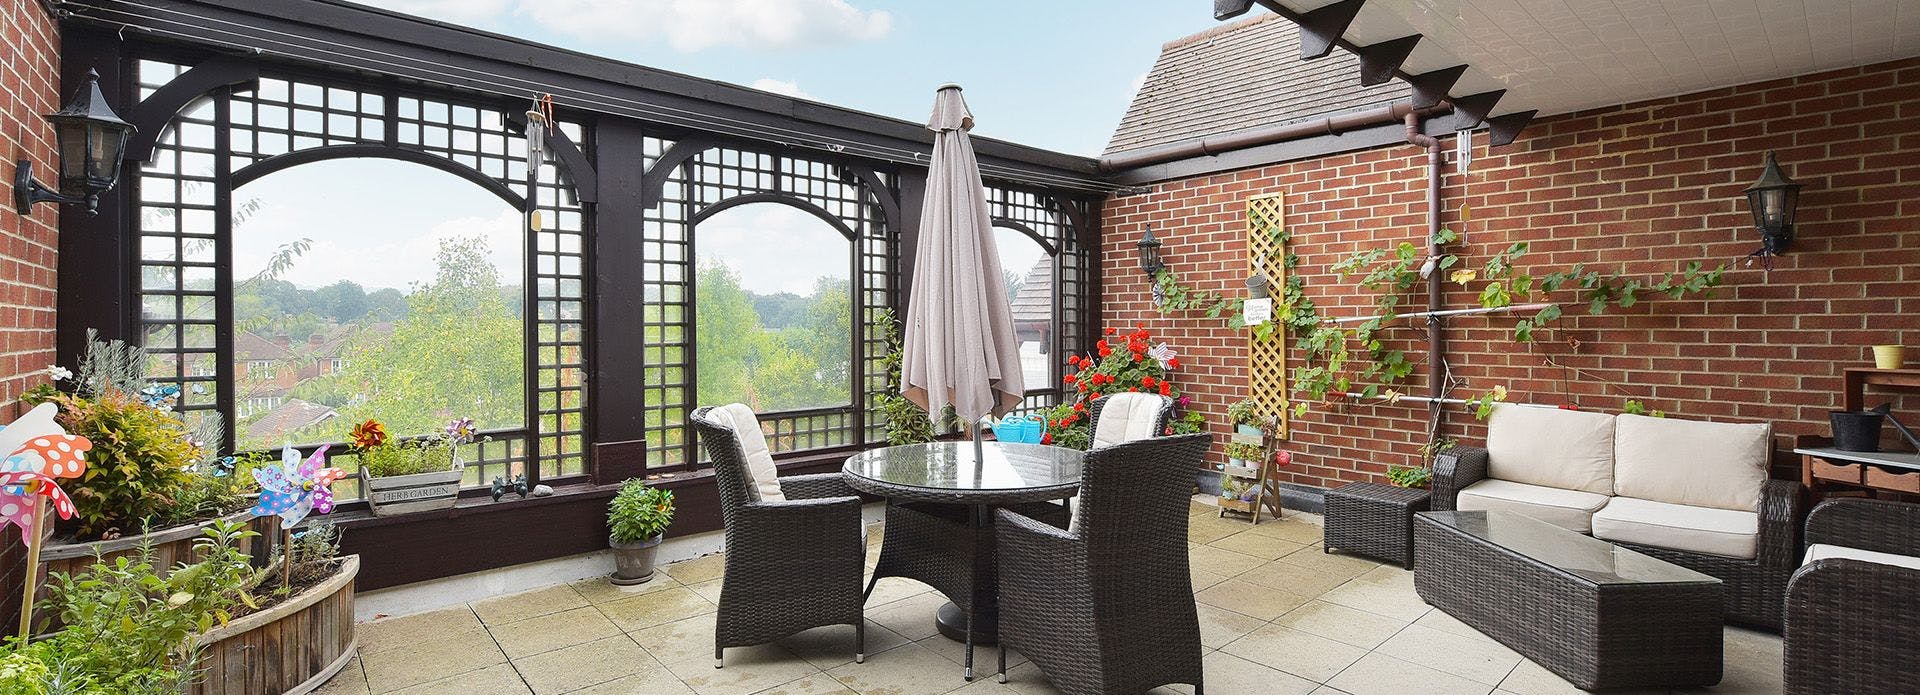 Outdoor Area at Guilford House Care Home in Guilford, Surrey